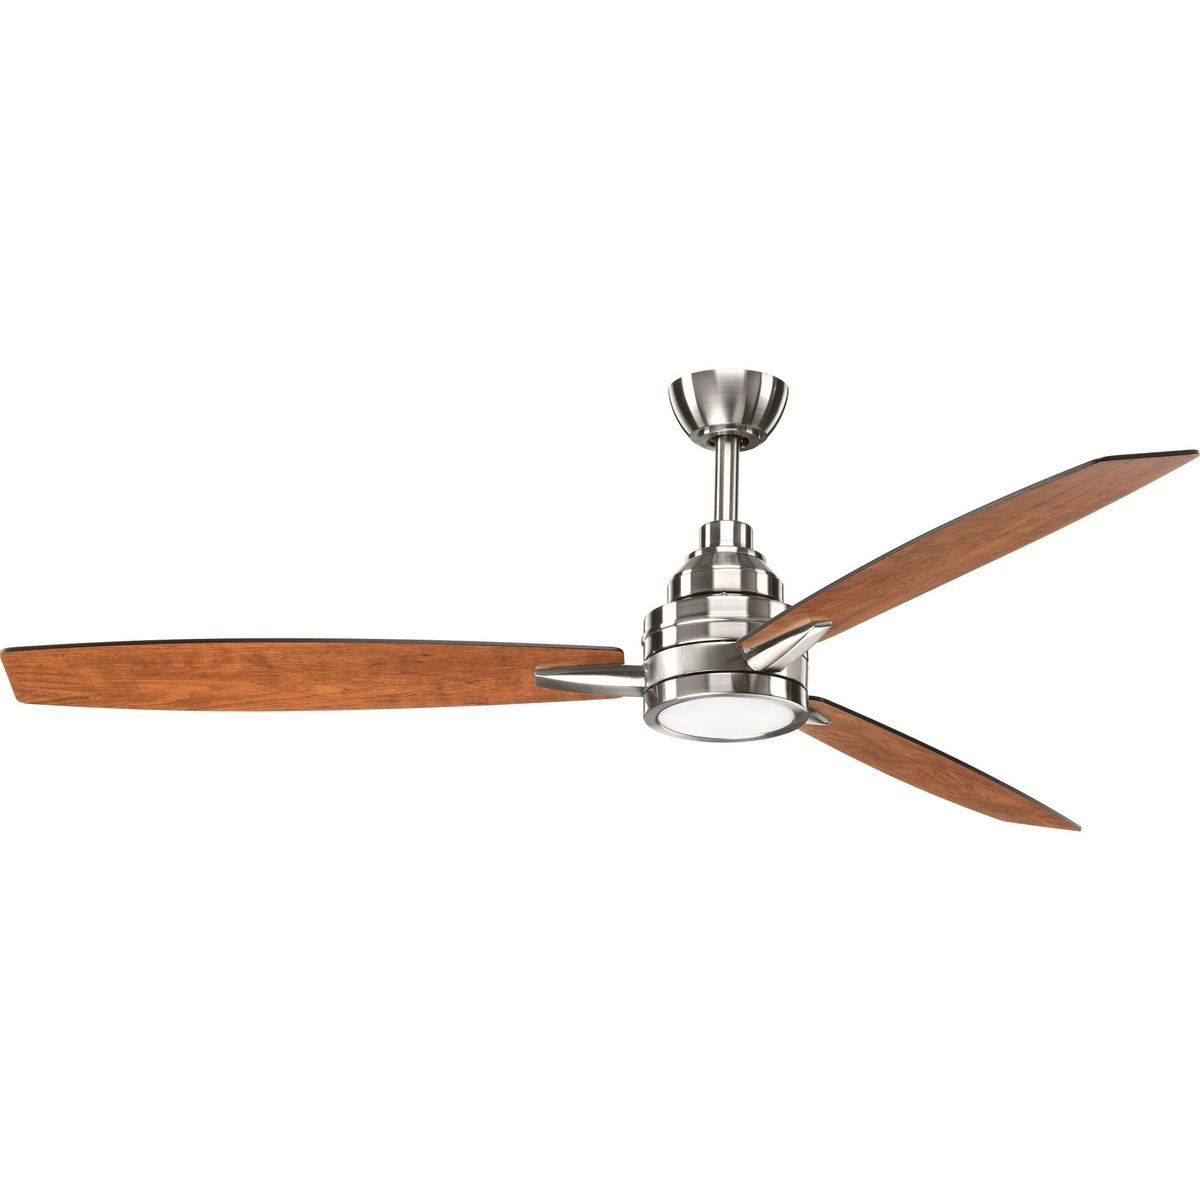 Troxler 3 Blade Ceiling Fans Pertaining To Trendy 60" Troy 3 Blade Led Ceiling Fan With Remote, Light Kit Included (View 16 of 20)